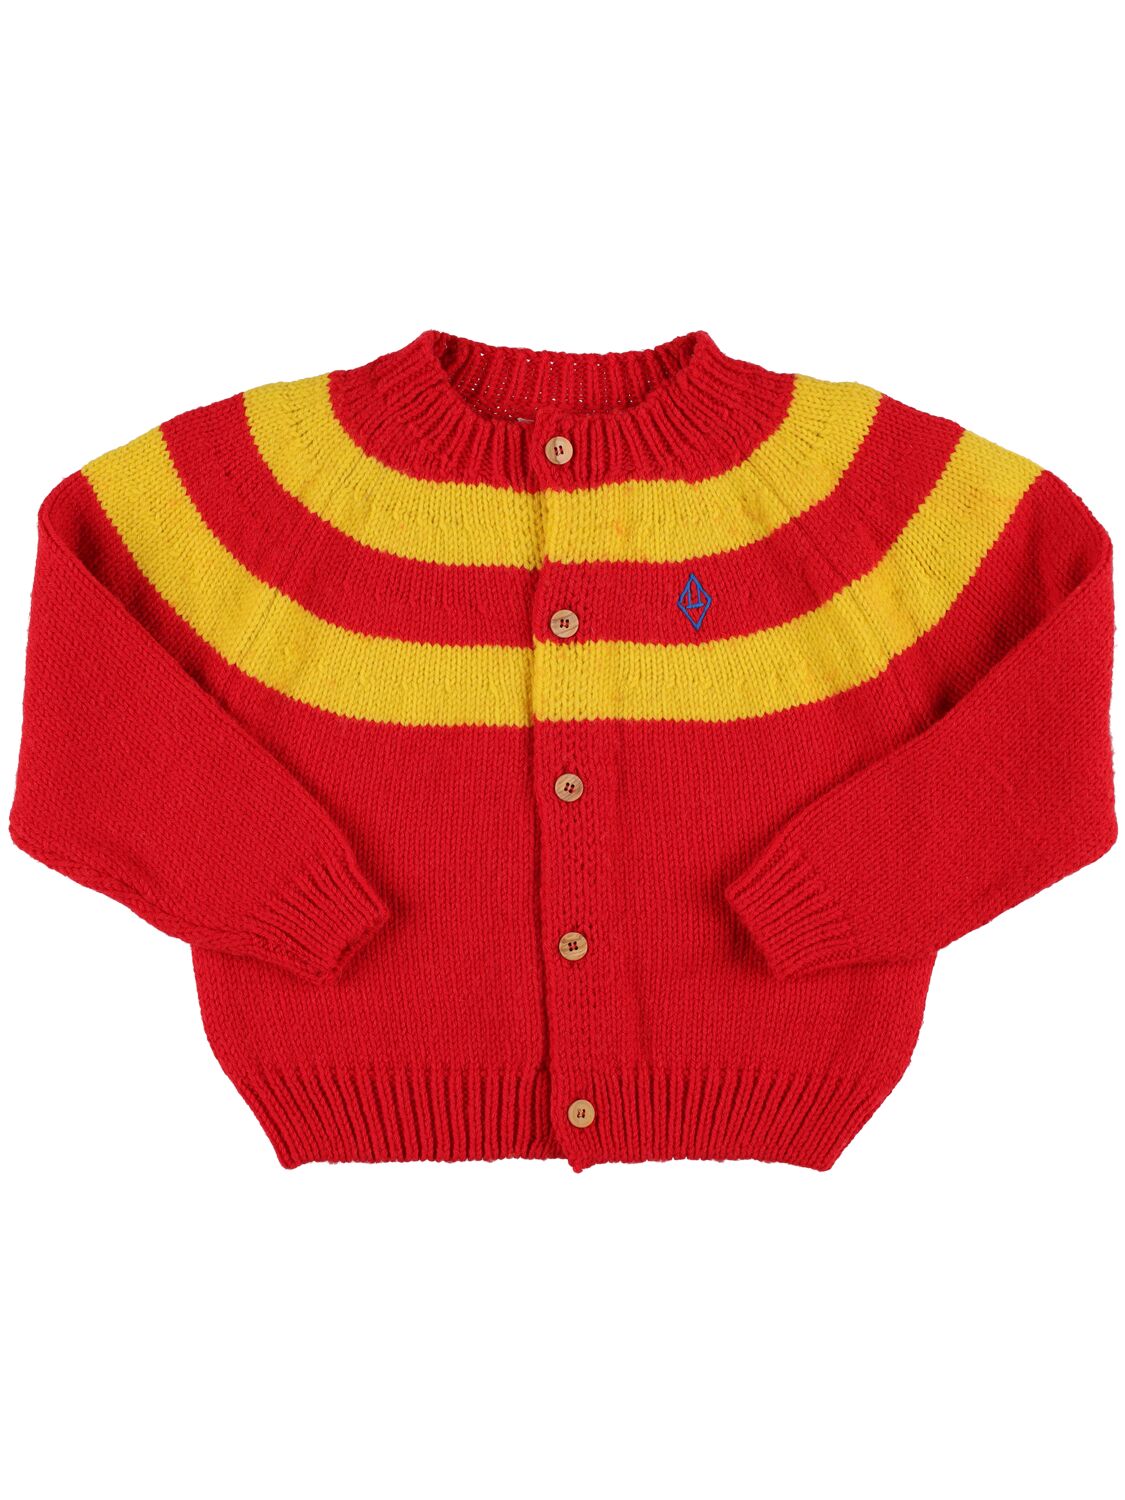 The Animals Observatory Kids' Wool Knit Cardigan In Red